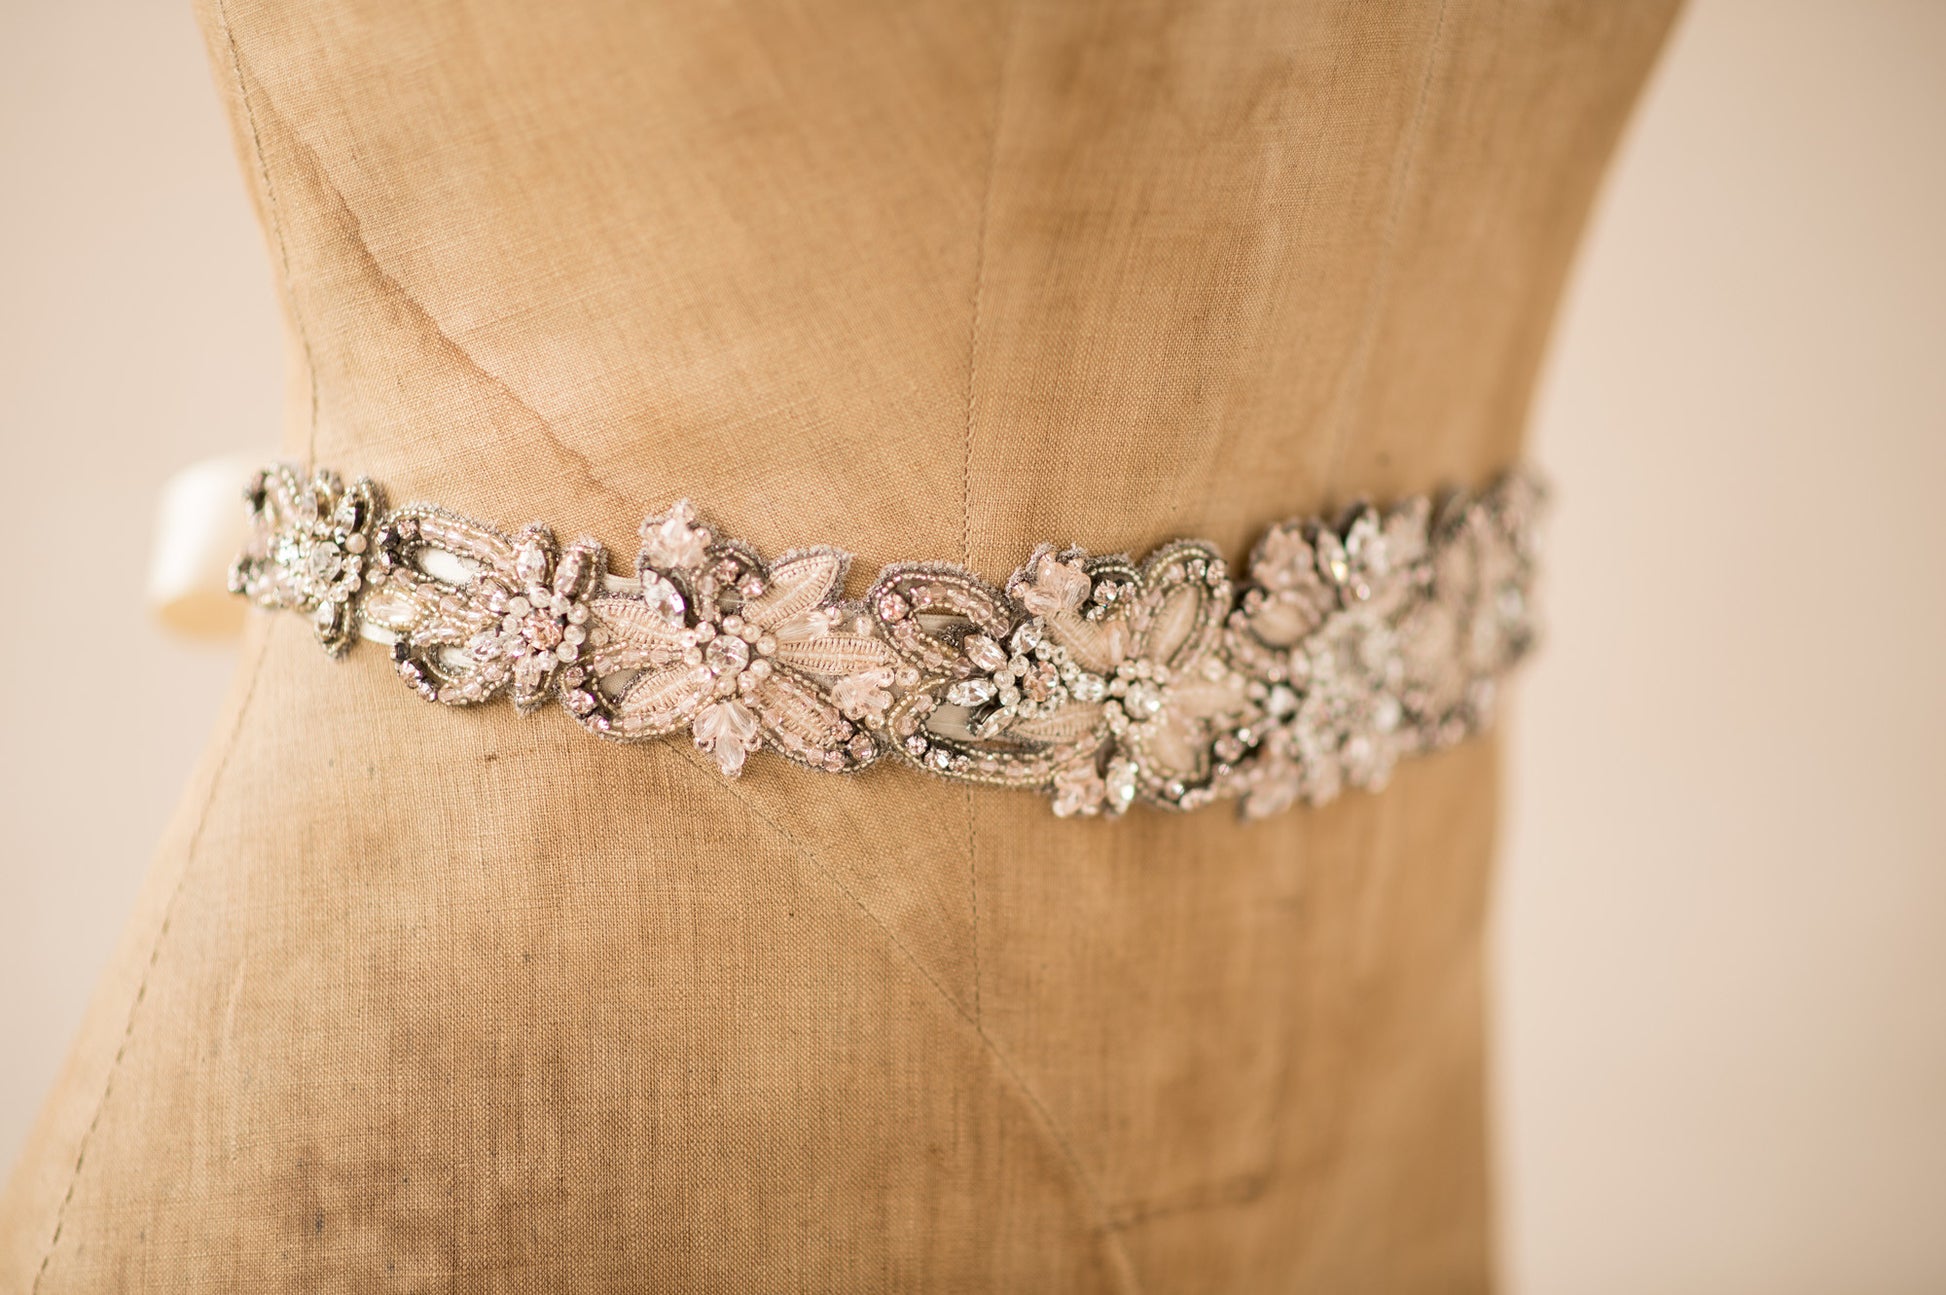 Blush Bridal Sash Floral Wedding Belt Champagne Flower Beaded Trim Vintage Crystal Applique Pink Embroidered Gunmetal Art Deco Belt, JOELLE SASH  for Her, for Bride, for Bridesmaid Gift , for Mother of the Bride, for Wedding Guest or Special Occasion by Camilla Christine Bridal Jewelry and Wedding Accessories. Bridal Style Inspiration Trends for Bride, Wedding Ideas